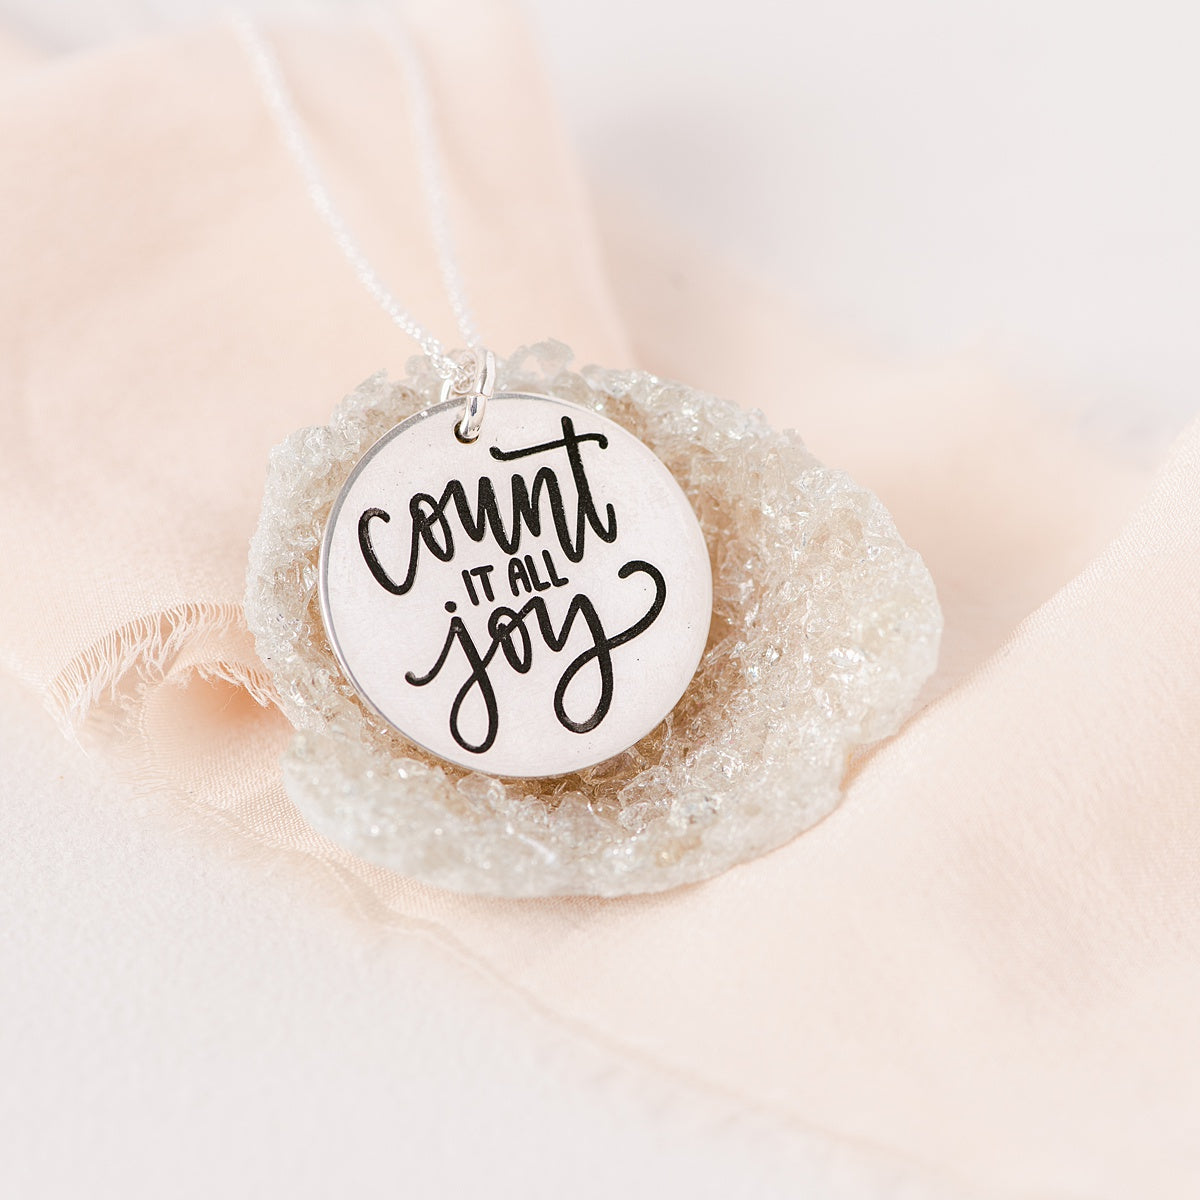 Sterling Silver Count It All Joy Pendant Necklace | James 1:2-4